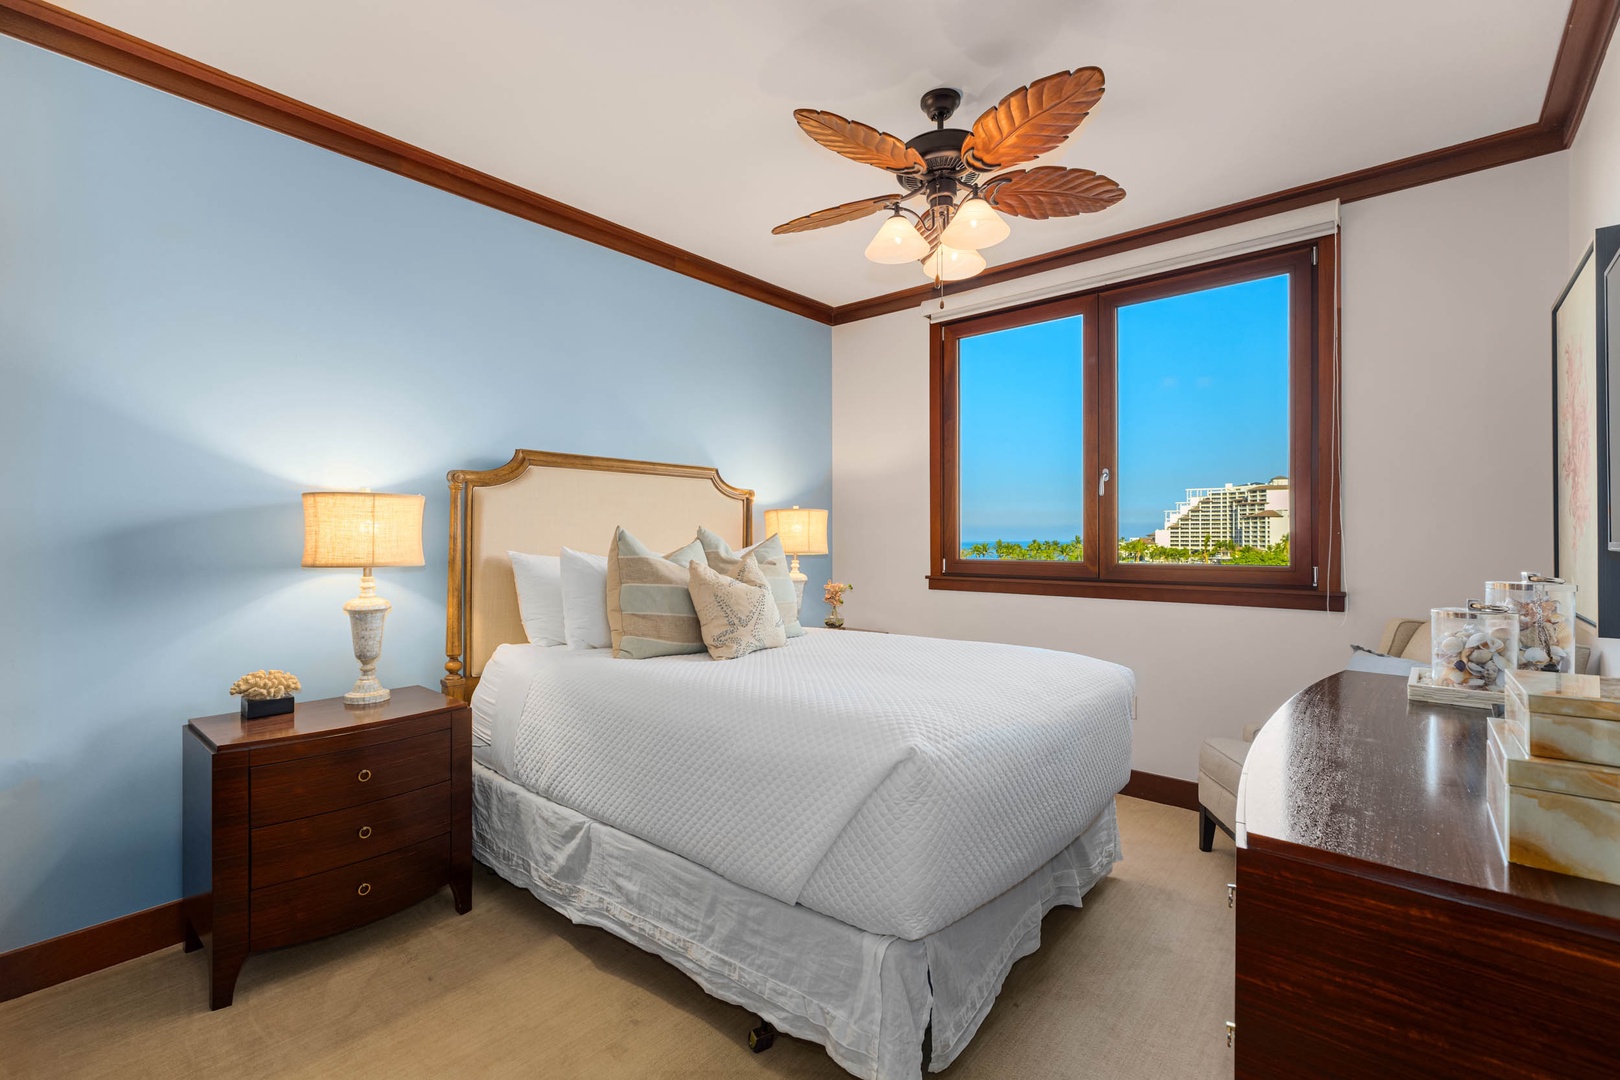 Kapolei Vacation Rentals, Ko Olina Beach Villa B604 - The relaxing second bedroom features luxurious queen bed.